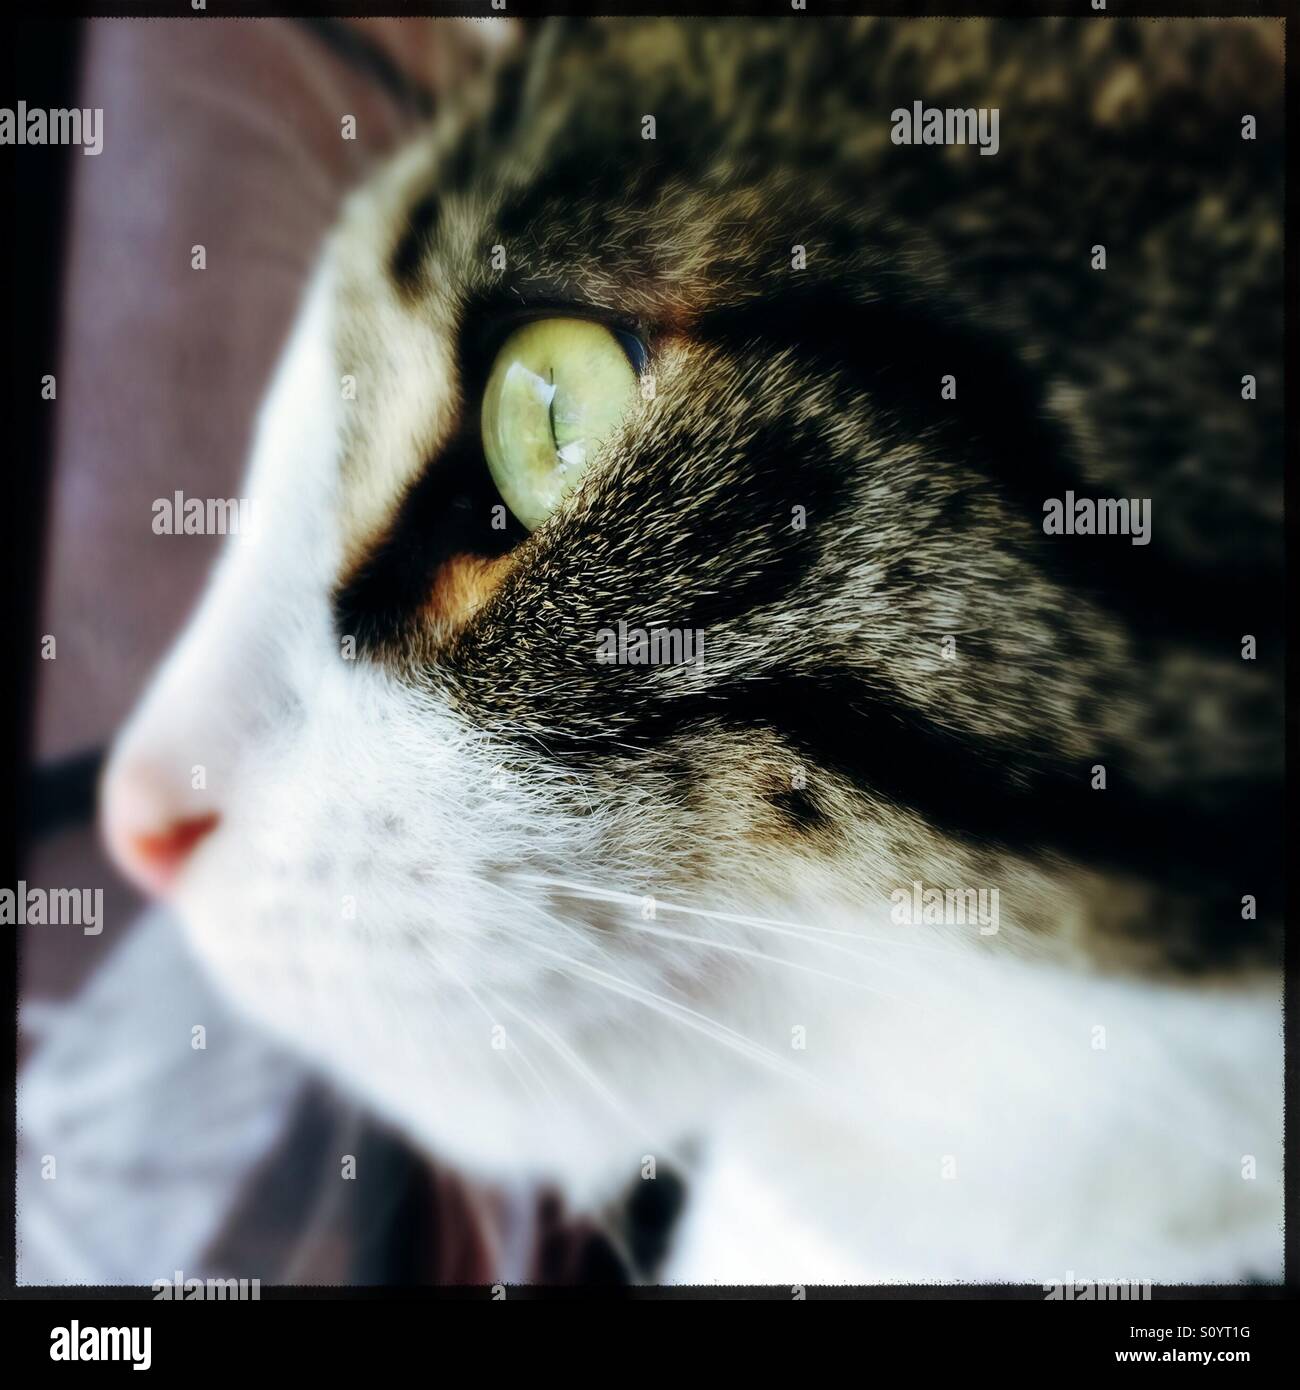 Closeup profile of tabby and white cat with green eyes Stock Photo